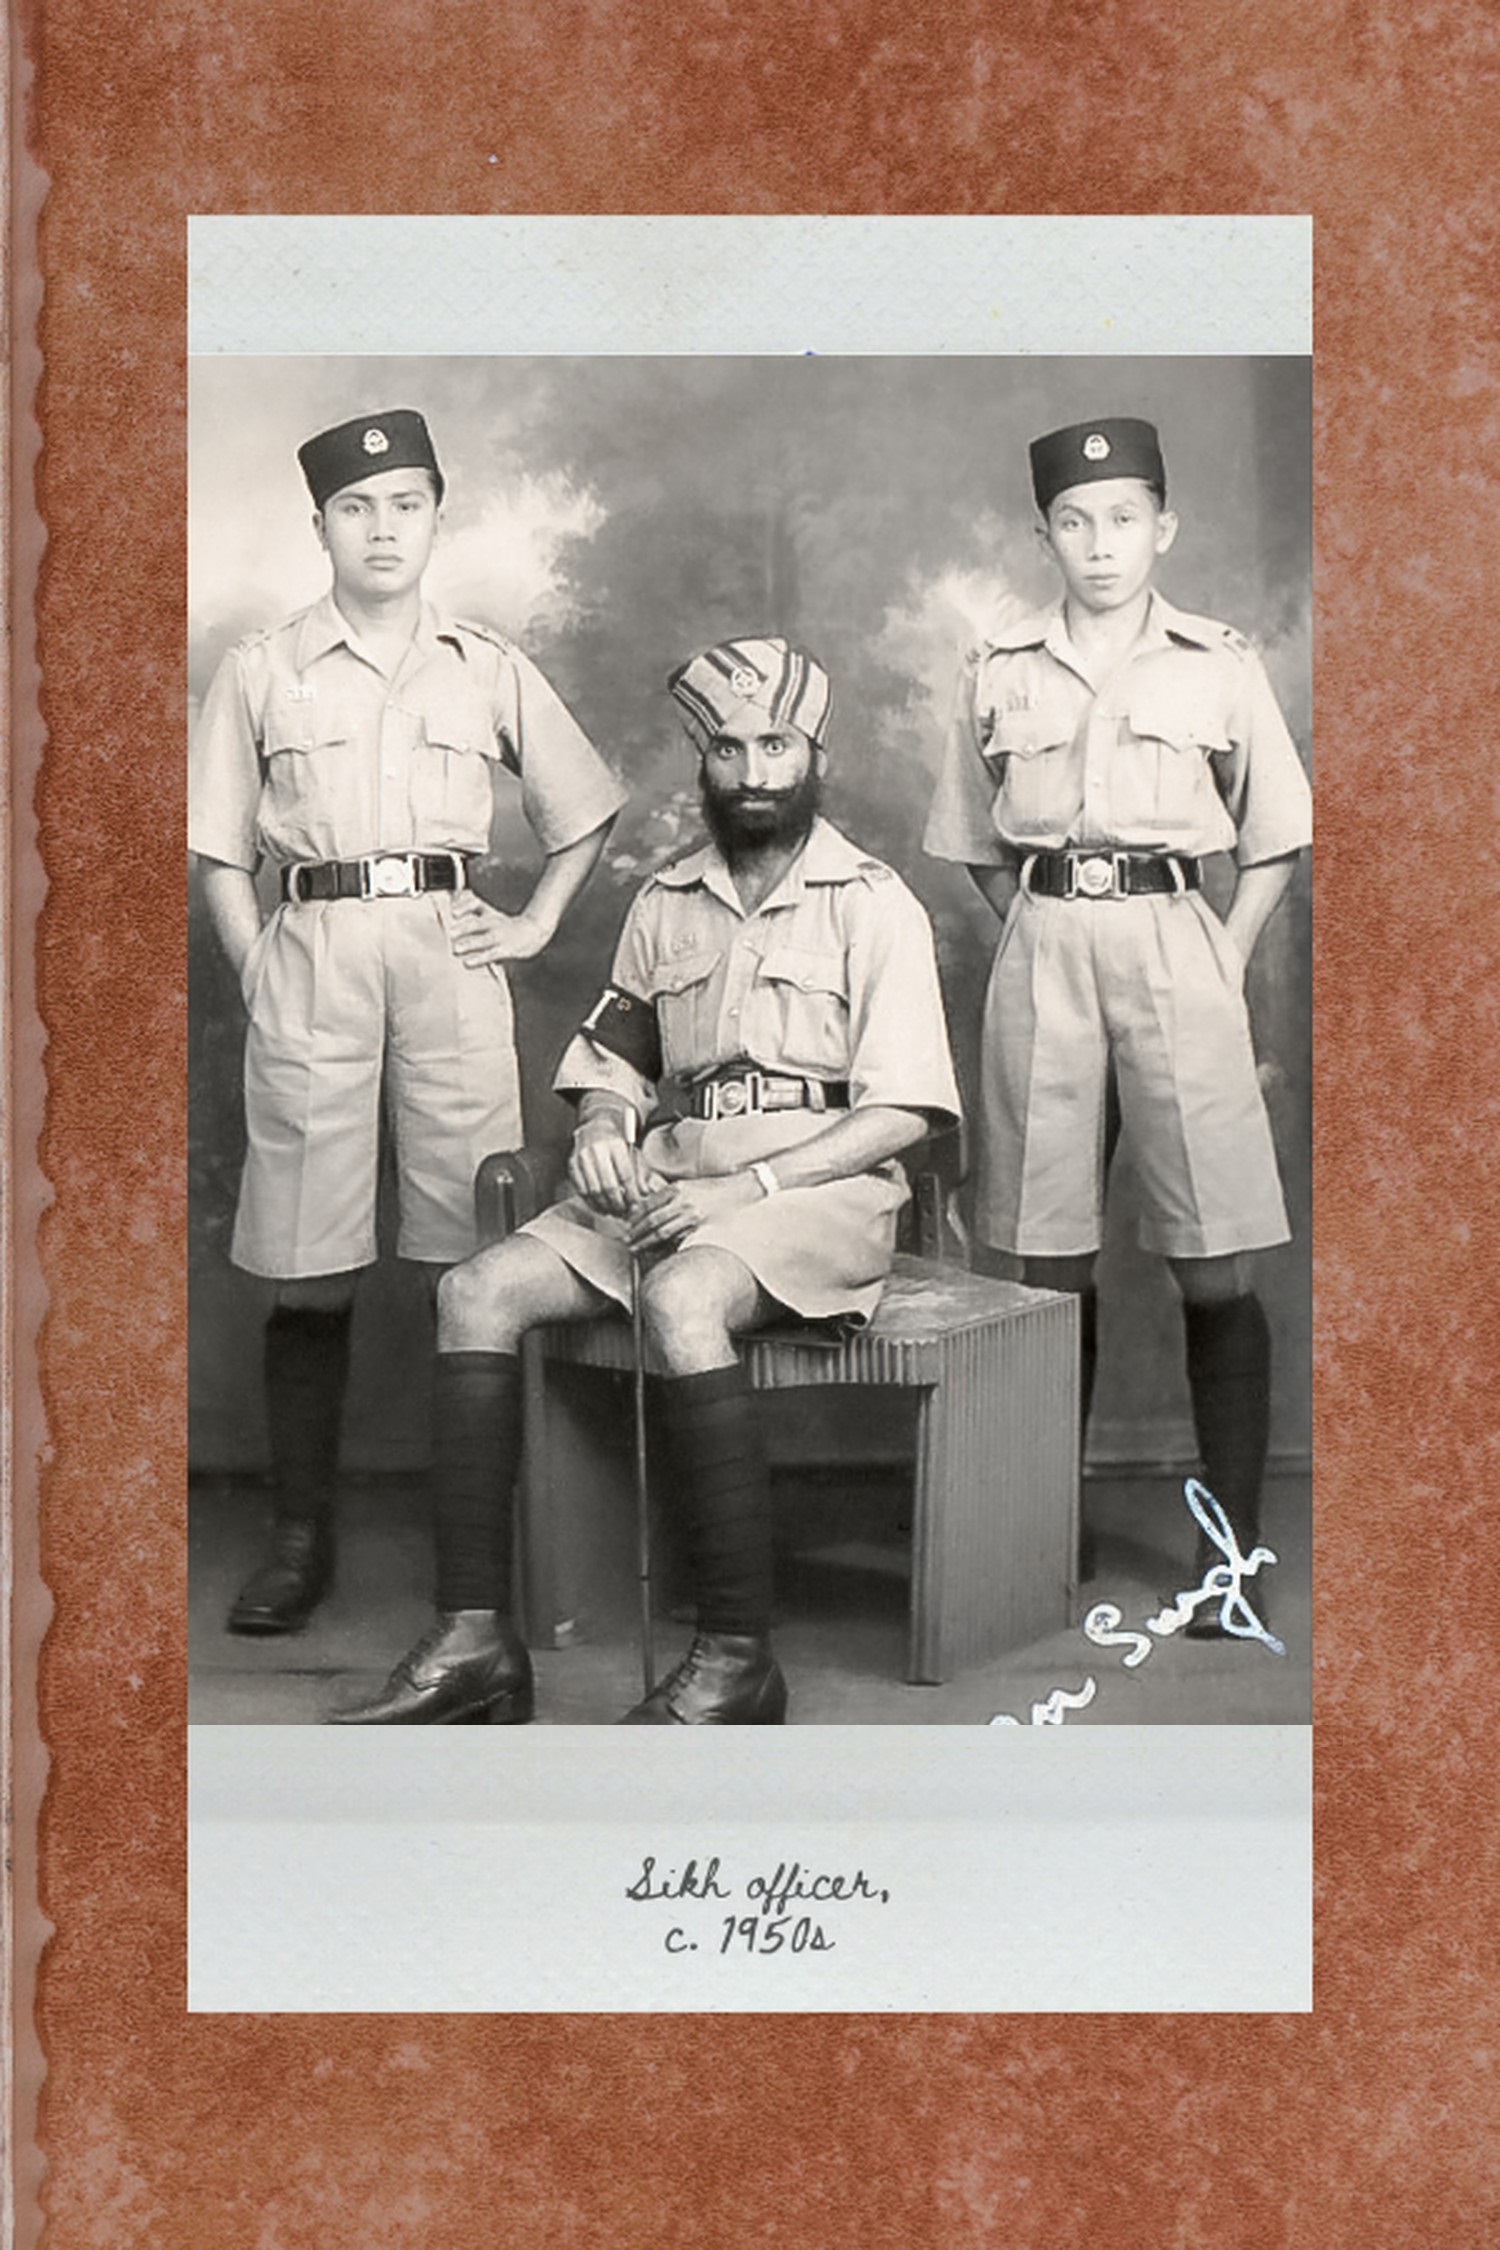 a sikh officer seated in uniform with a training pace stick while two malay officers are standing behind him